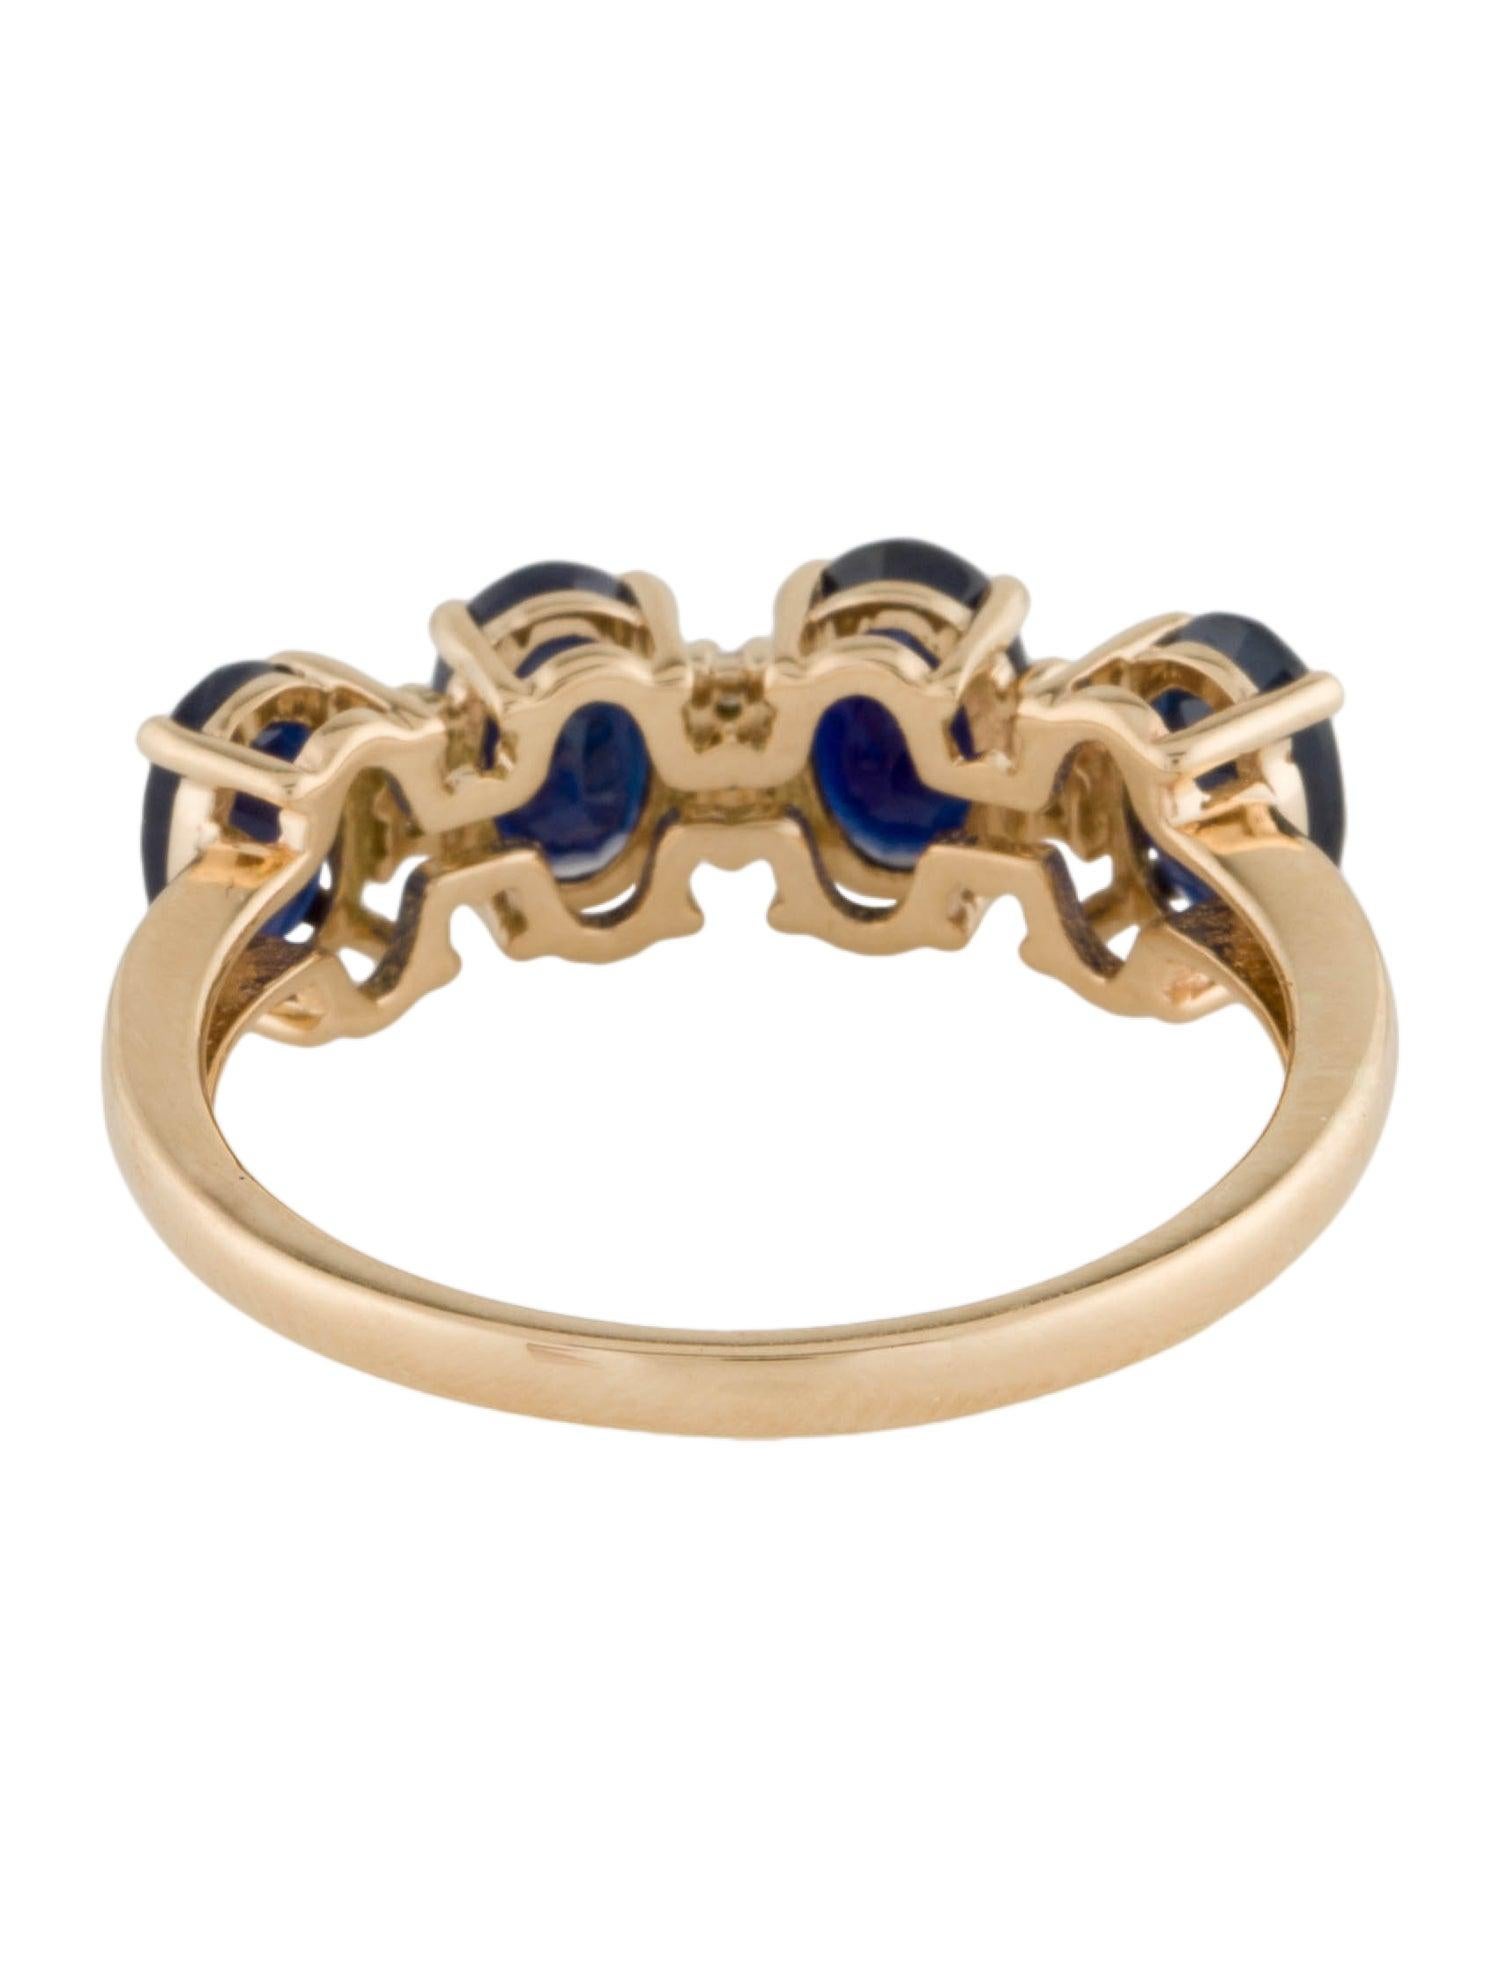 Brilliant Cut Luxurious 14K Gold Sapphire & Diamond Cocktail Ring - Size 6.75 - Fine Jewelry For Sale